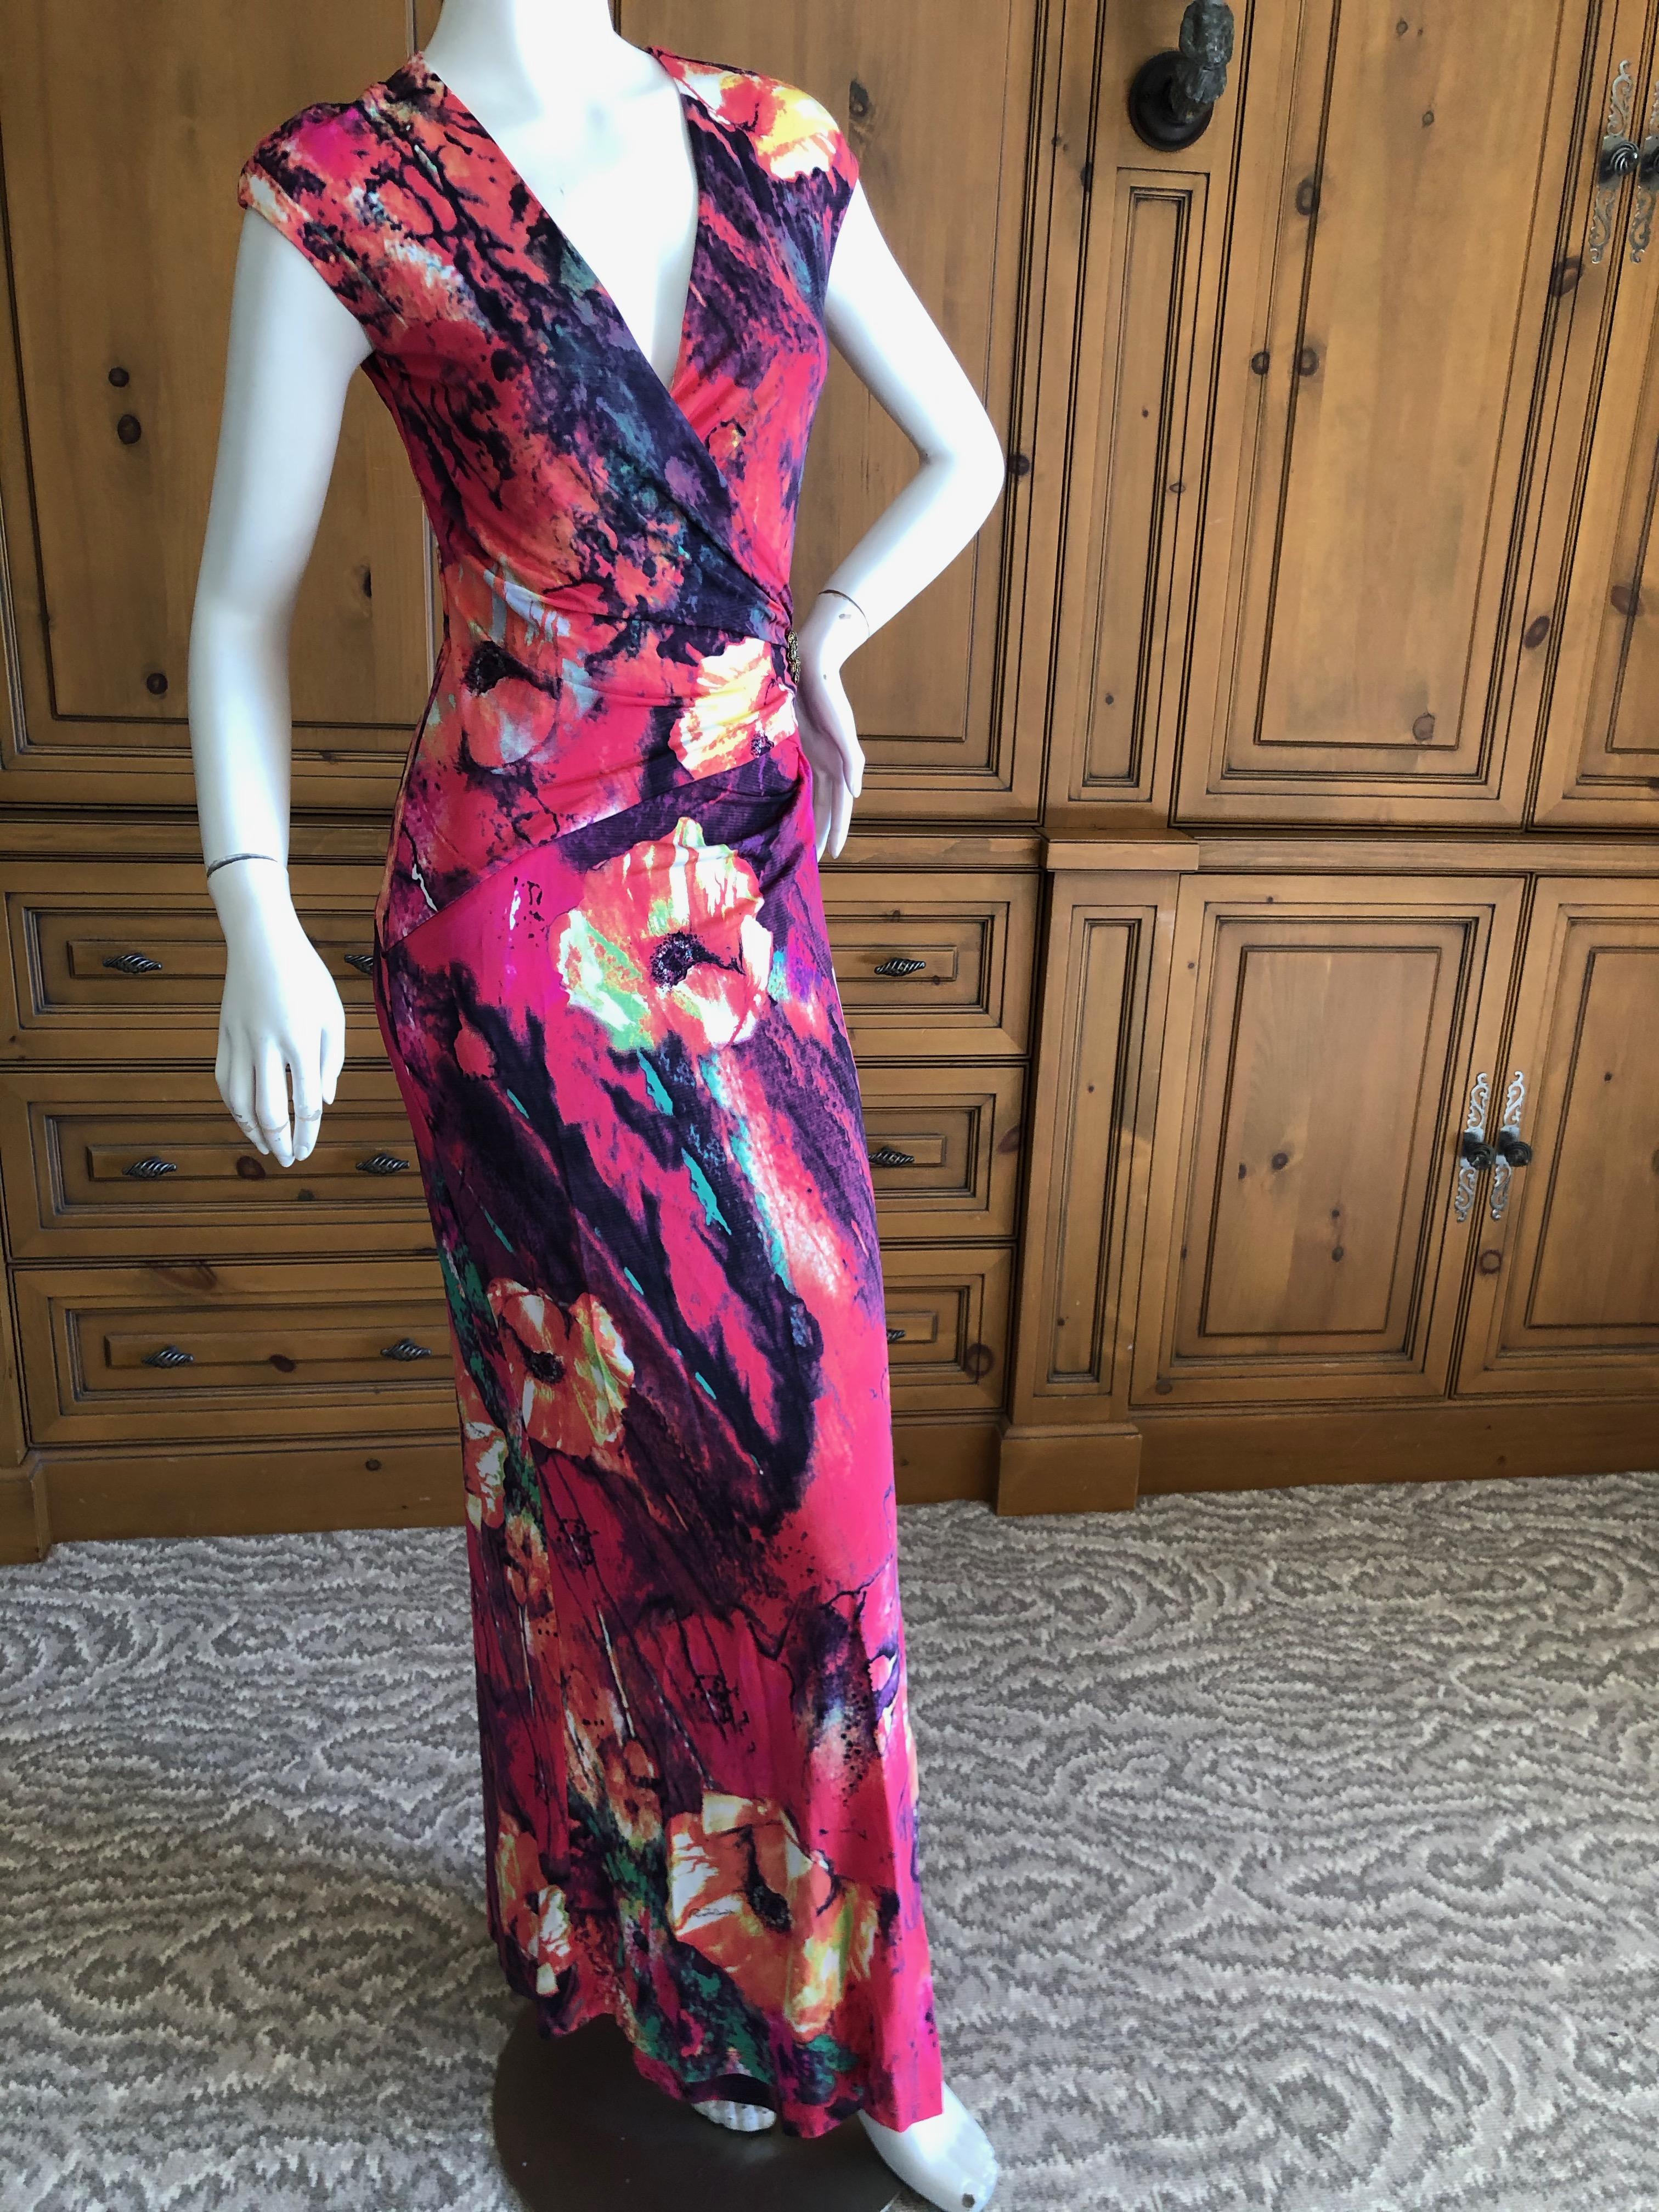 Roberto Cavalli Low Cut Floral VIntage Evening Dress
Size Small , there is a lot of stretch
Bust 38